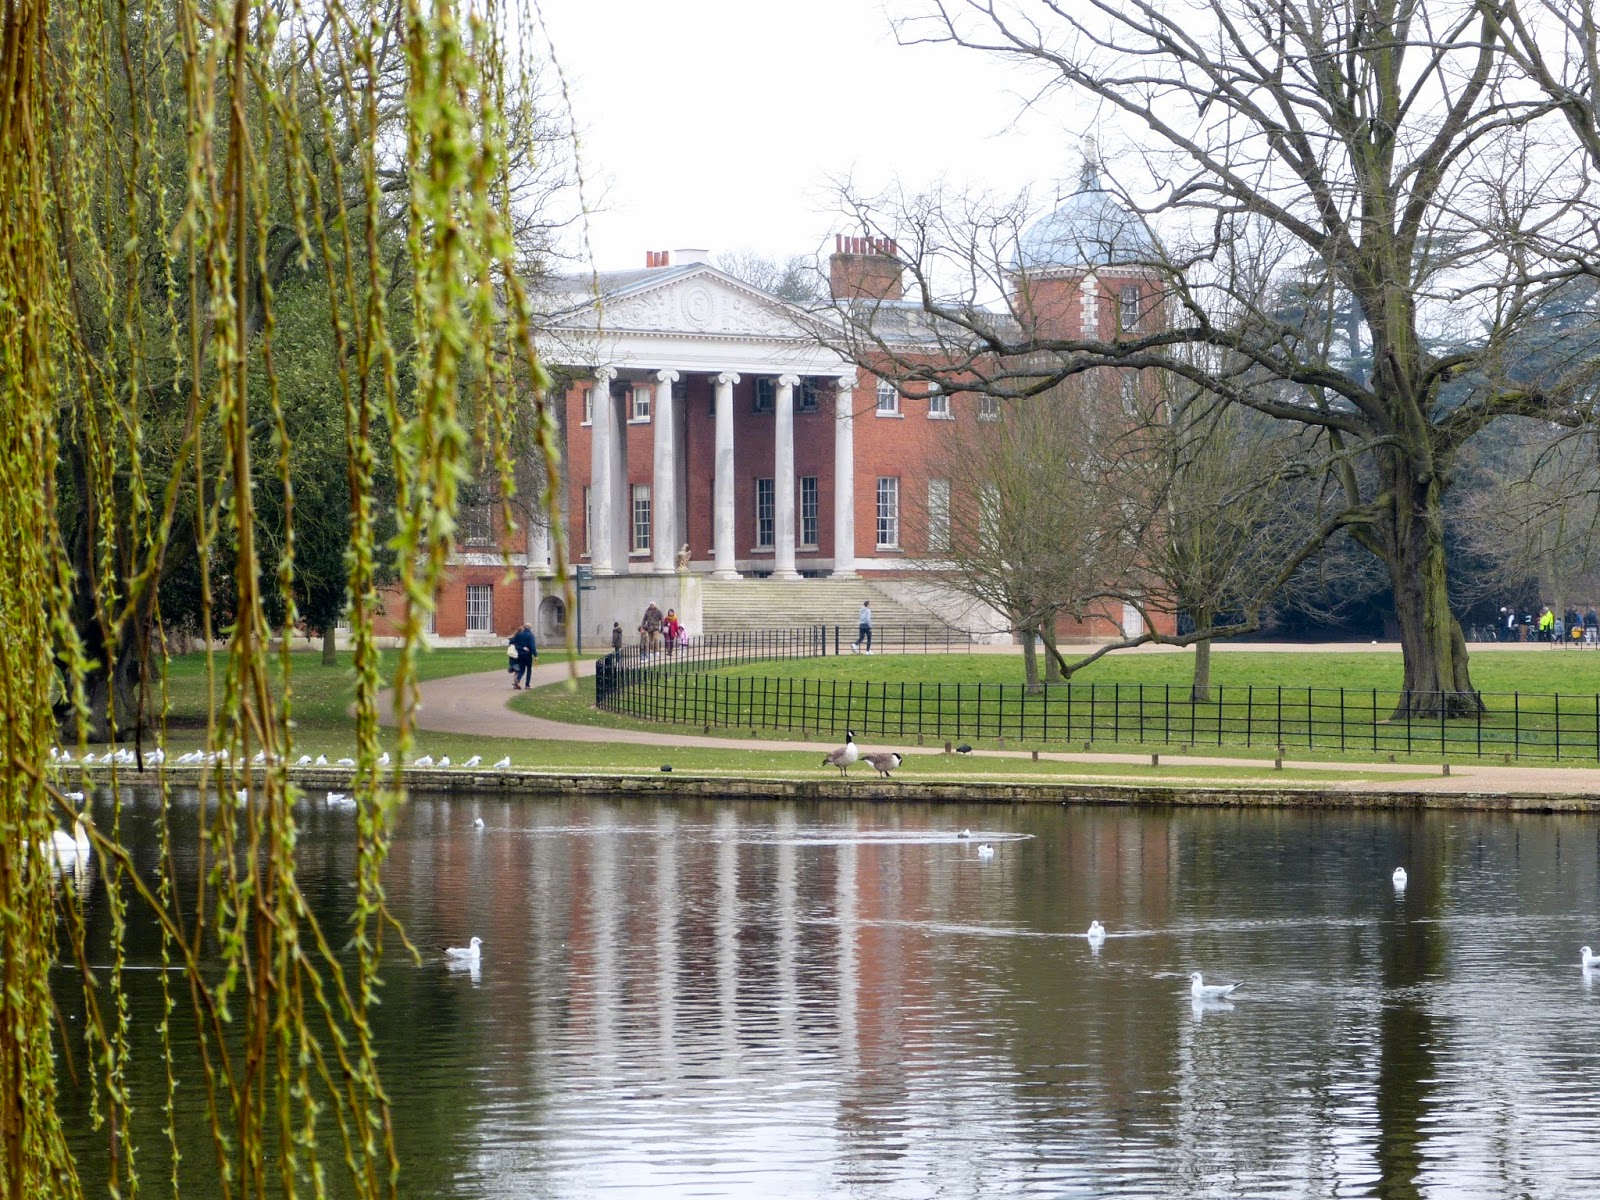 Osterley Park from across the lake